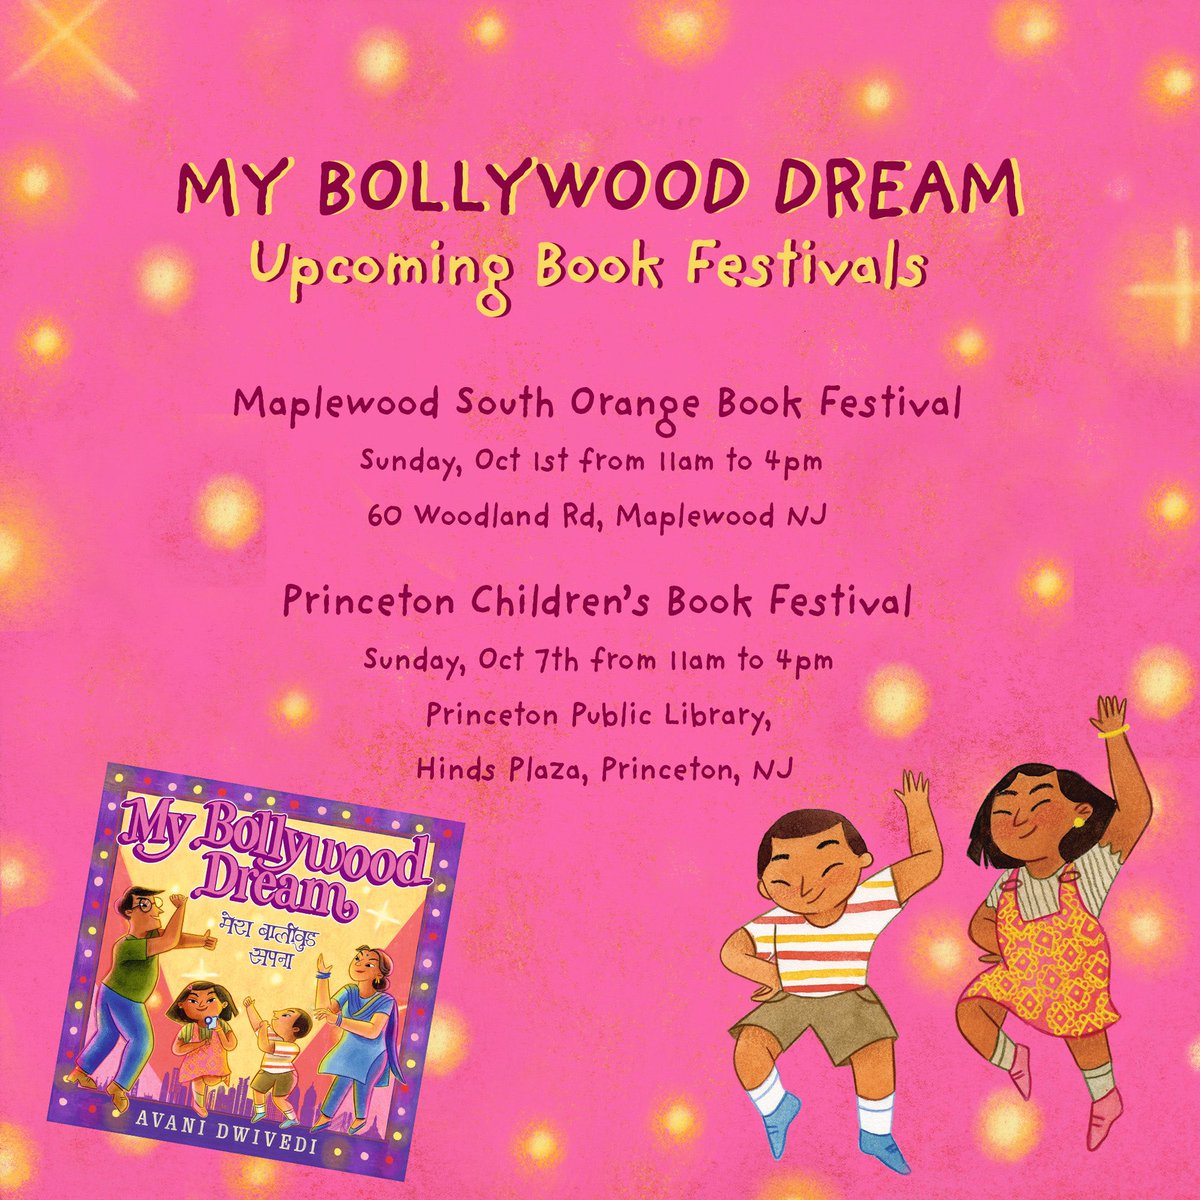 I’m so excited to be at two wonderful book festivals in the coming weeks, the Maplewood South Orange Book Festival (10/1) and Princeton Book Festivals (10/7) where I’ll be signing books. See you there!✨